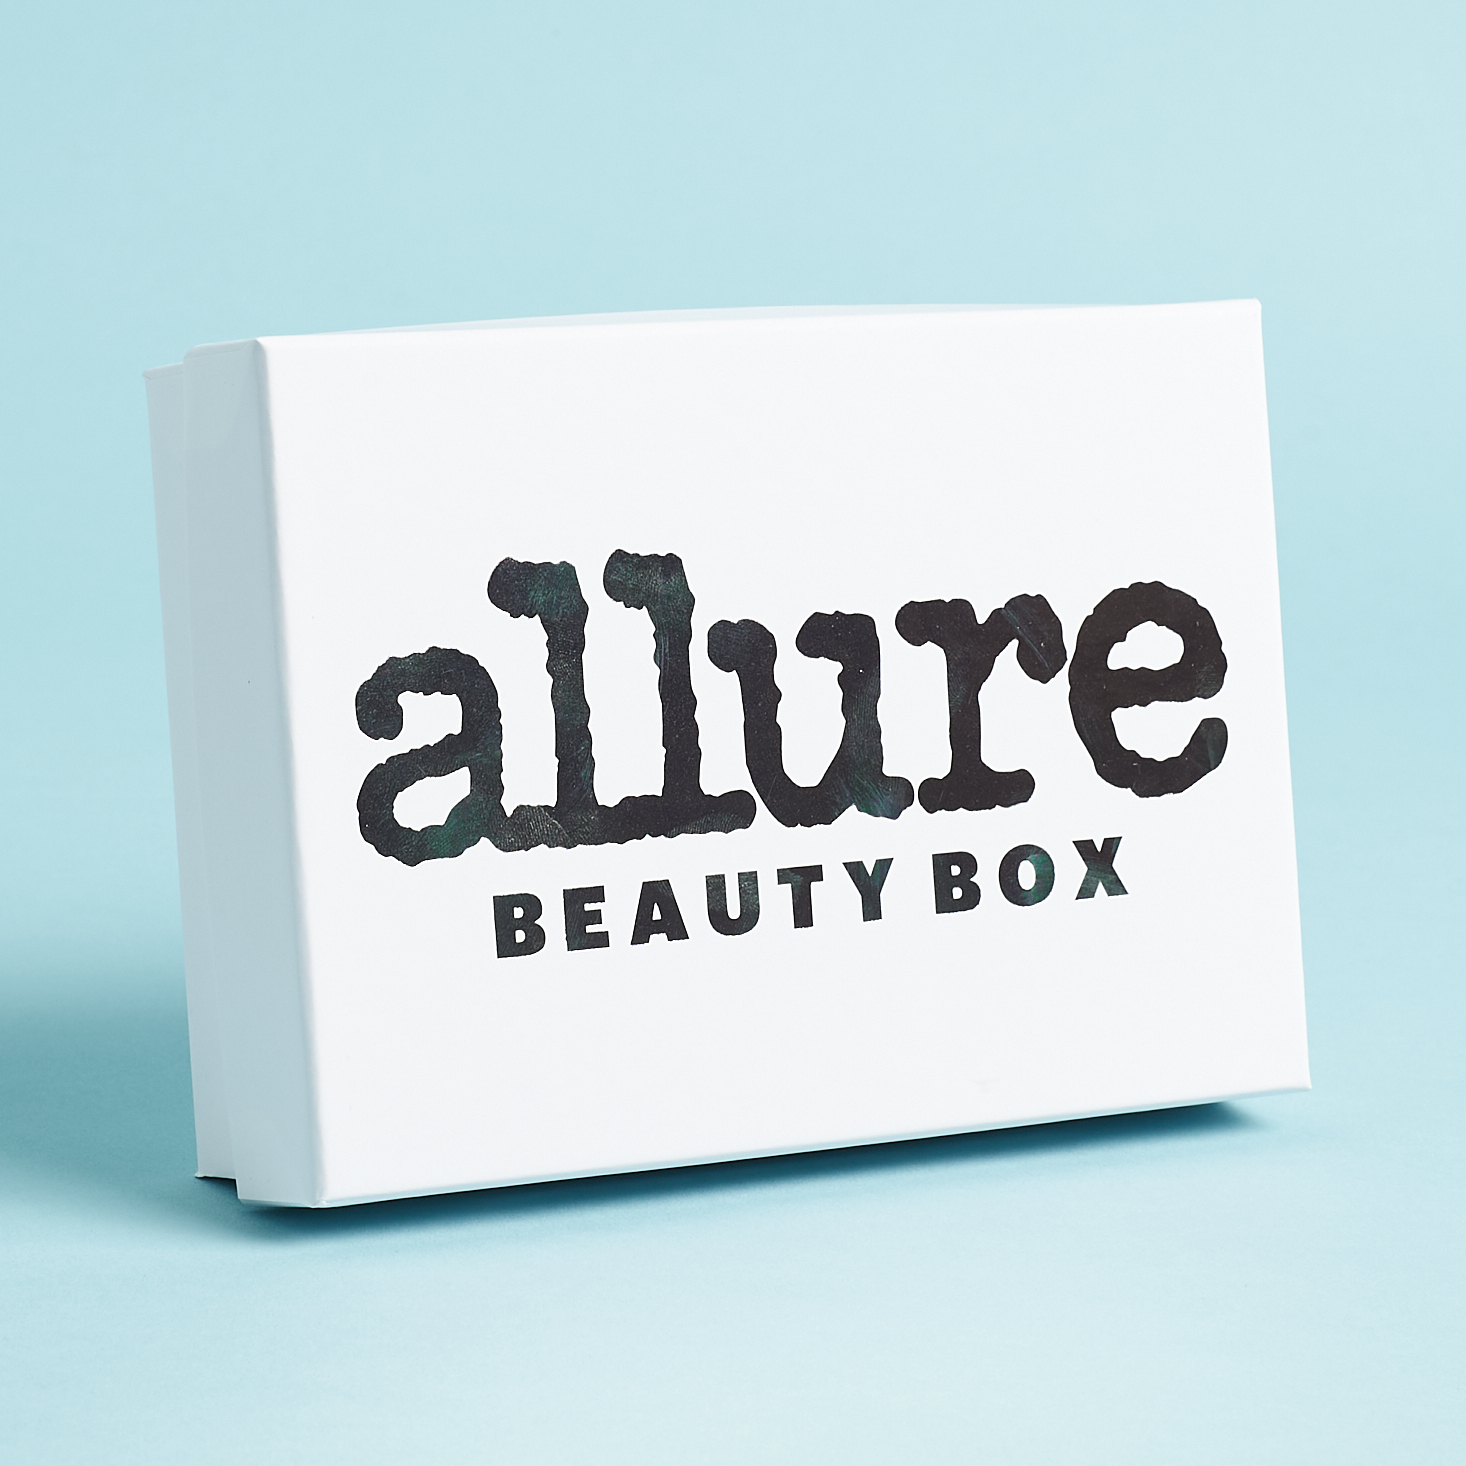 Win a 3 Month Subscription to Allure Beauty Box